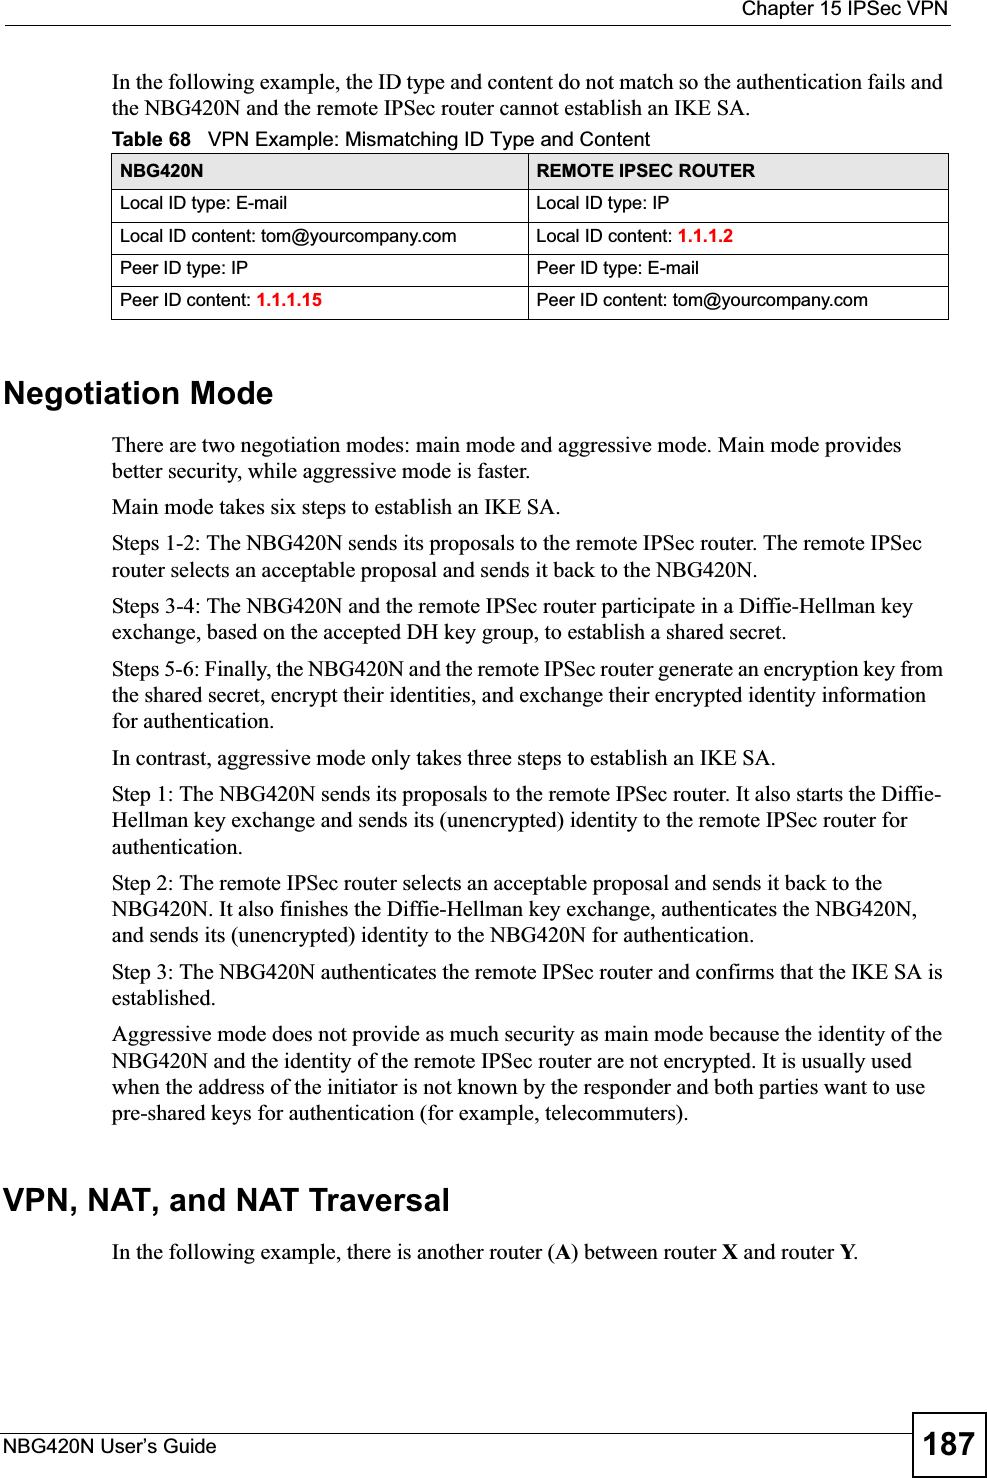  Chapter 15 IPSec VPNNBG420N User’s Guide 187In the following example, the ID type and content do not match so the authentication fails and the NBG420N and the remote IPSec router cannot establish an IKE SA.Negotiation ModeThere are two negotiation modes: main mode and aggressive mode. Main mode provides better security, while aggressive mode is faster.Main mode takes six steps to establish an IKE SA.Steps 1-2: The NBG420N sends its proposals to the remote IPSec router. The remote IPSec router selects an acceptable proposal and sends it back to the NBG420N.Steps 3-4: The NBG420N and the remote IPSec router participate in a Diffie-Hellman key exchange, based on the accepted DH key group, to establish a shared secret.Steps 5-6: Finally, the NBG420N and the remote IPSec router generate an encryption key from the shared secret, encrypt their identities, and exchange their encrypted identity information for authentication.In contrast, aggressive mode only takes three steps to establish an IKE SA.Step 1: The NBG420N sends its proposals to the remote IPSec router. It also starts the Diffie-Hellman key exchange and sends its (unencrypted) identity to the remote IPSec router for authentication.Step 2: The remote IPSec router selects an acceptable proposal and sends it back to the NBG420N. It also finishes the Diffie-Hellman key exchange, authenticates the NBG420N, and sends its (unencrypted) identity to the NBG420N for authentication.Step 3: The NBG420N authenticates the remote IPSec router and confirms that the IKE SA is established.Aggressive mode does not provide as much security as main mode because the identity of the NBG420N and the identity of the remote IPSec router are not encrypted. It is usually used when the address of the initiator is not known by the responder and both parties want to use pre-shared keys for authentication (for example, telecommuters).VPN, NAT, and NAT TraversalIn the following example, there is another router (A) between router X and router Y.Table 68   VPN Example: Mismatching ID Type and ContentNBG420N REMOTE IPSEC ROUTERLocal ID type: E-mail Local ID type: IPLocal ID content: tom@yourcompany.com Local ID content: 1.1.1.2Peer ID type: IP Peer ID type: E-mailPeer ID content: 1.1.1.15 Peer ID content: tom@yourcompany.com